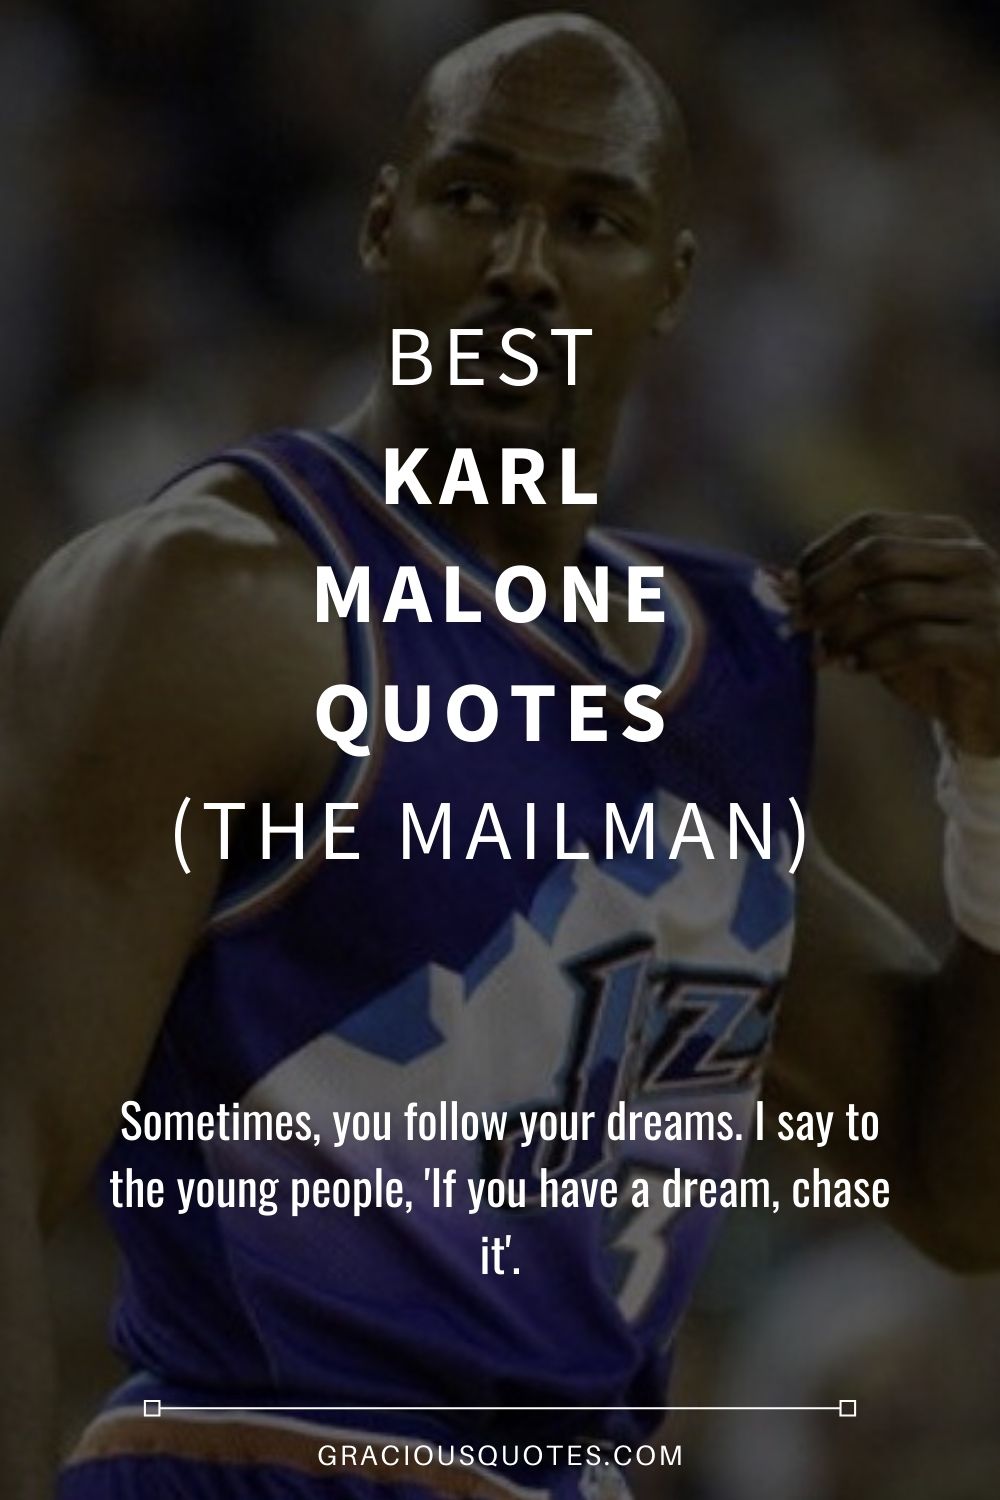 Best Karl Malone Quotes (THE MAILMAN) - Gracious Quotes